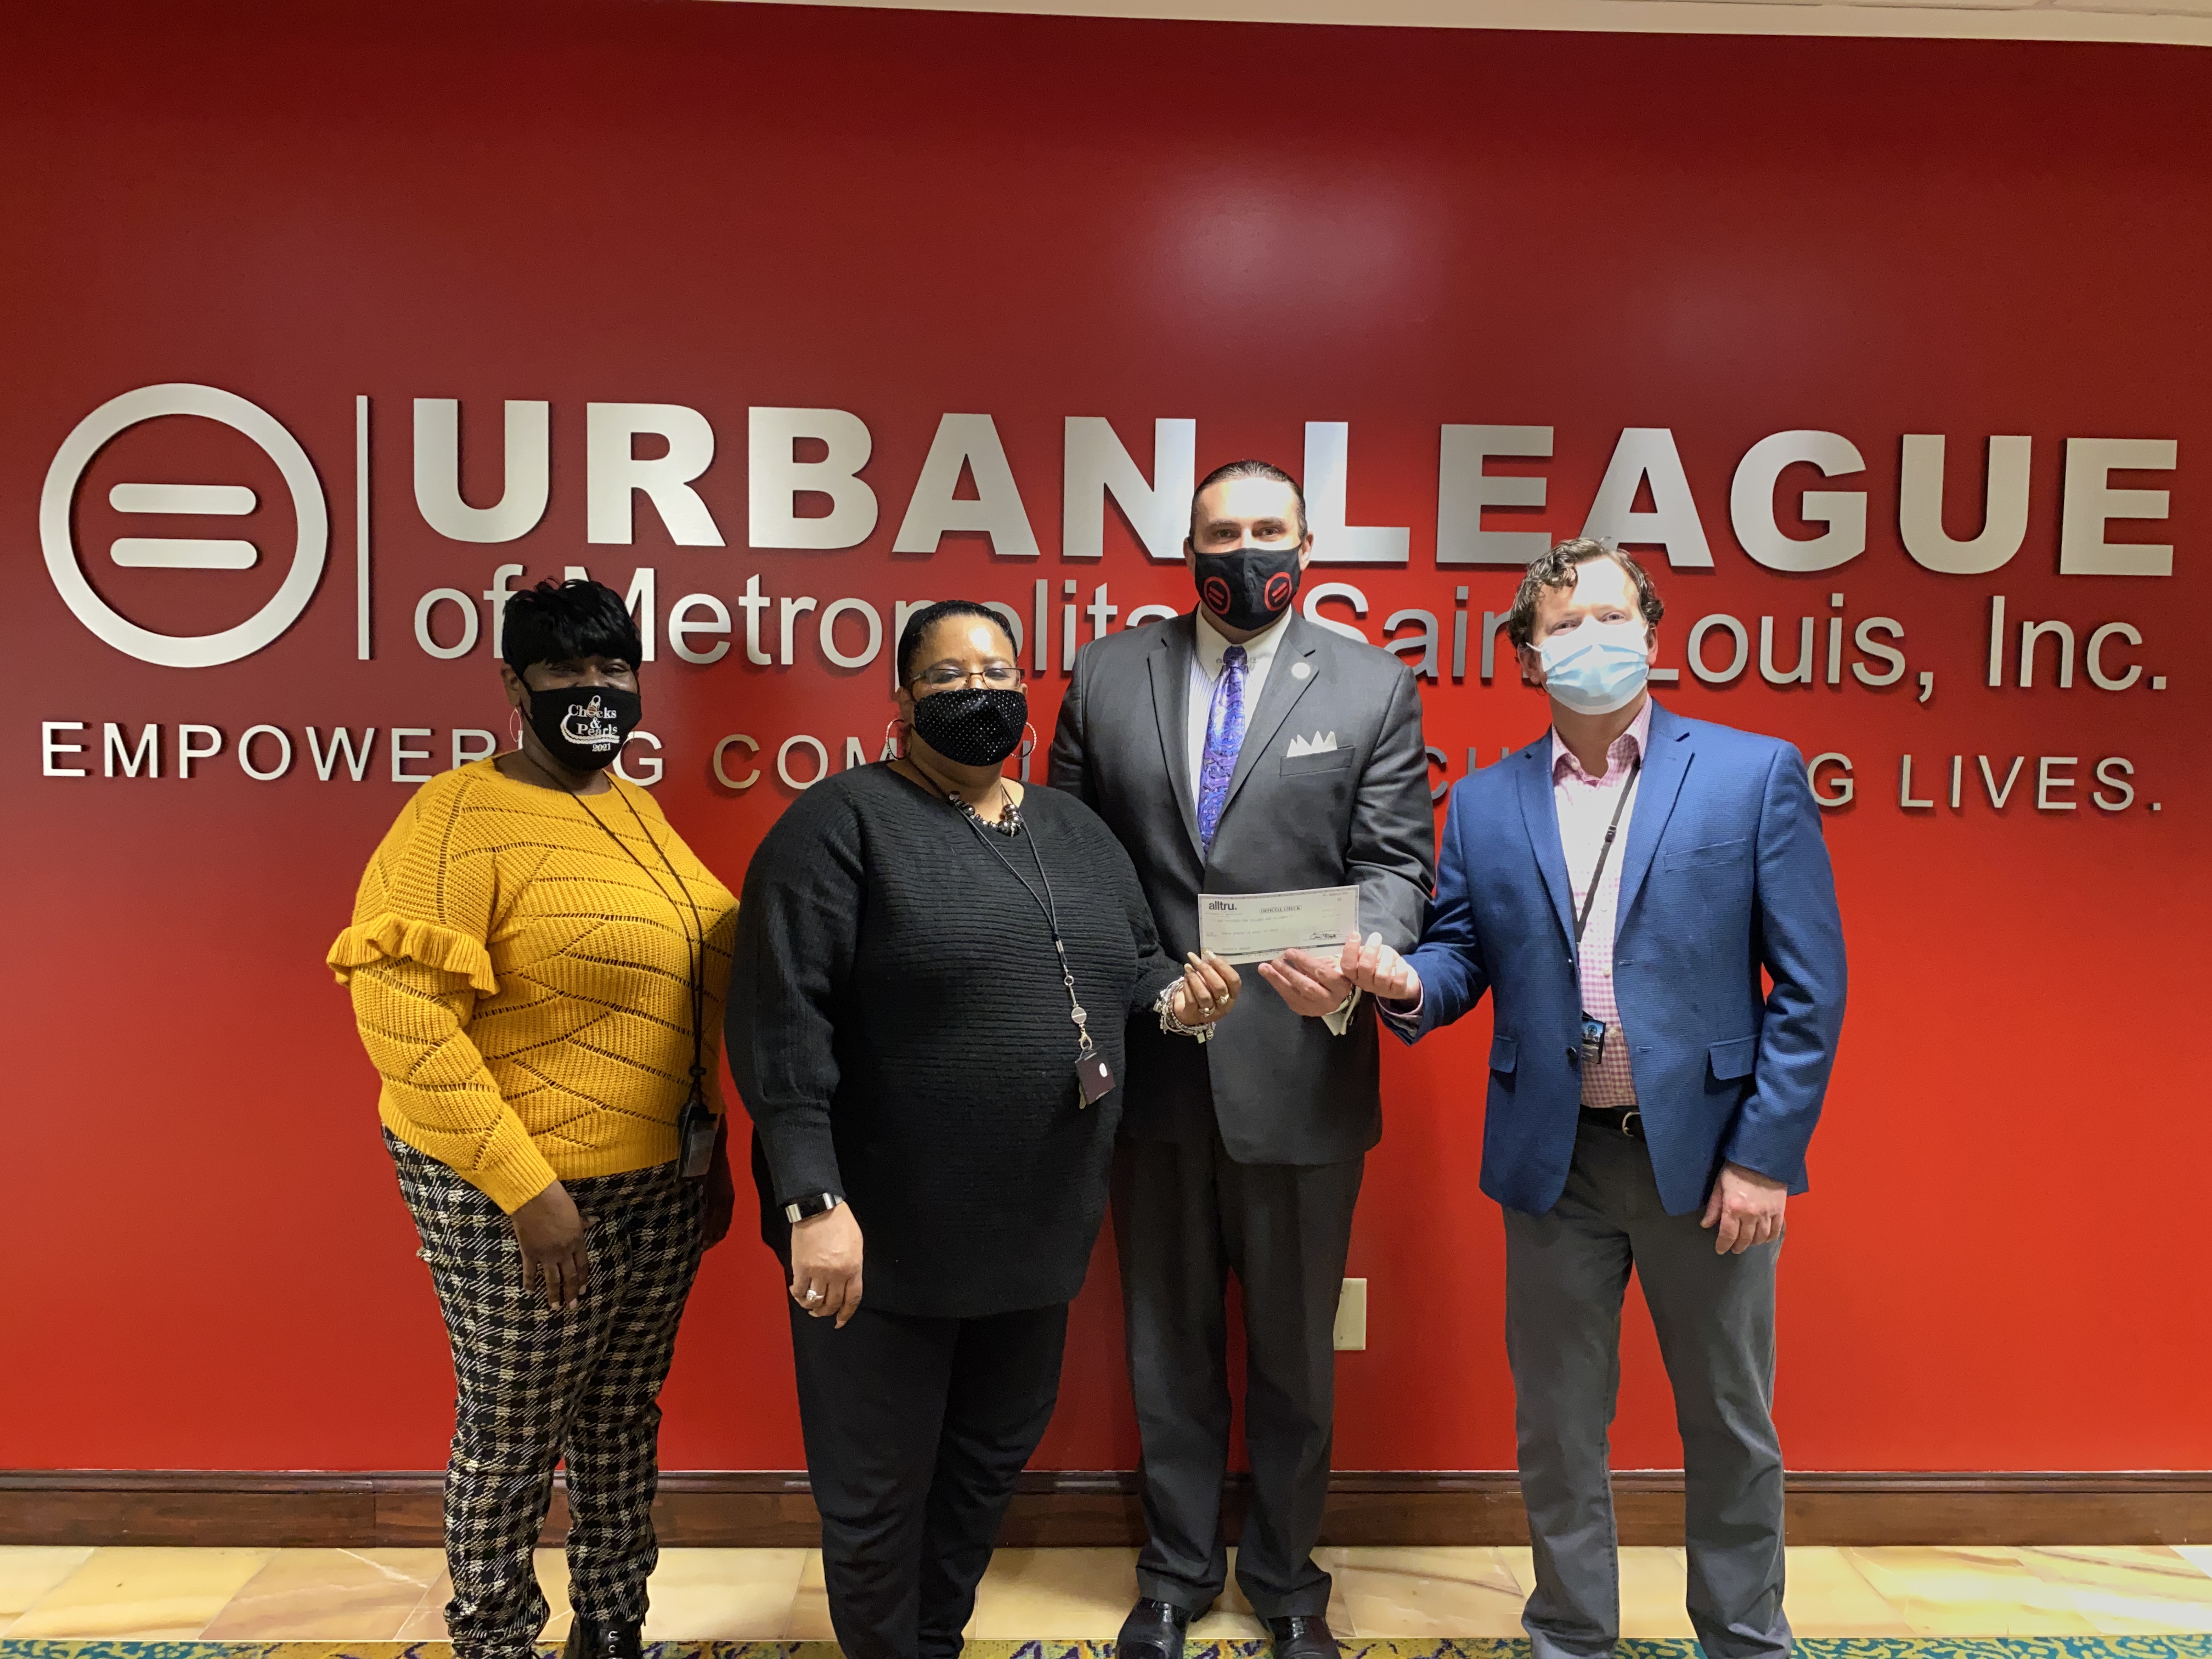 Photo from the Comptroller's Office Employees' charitable donation to the Urban League of Metropolitan St. Louis.